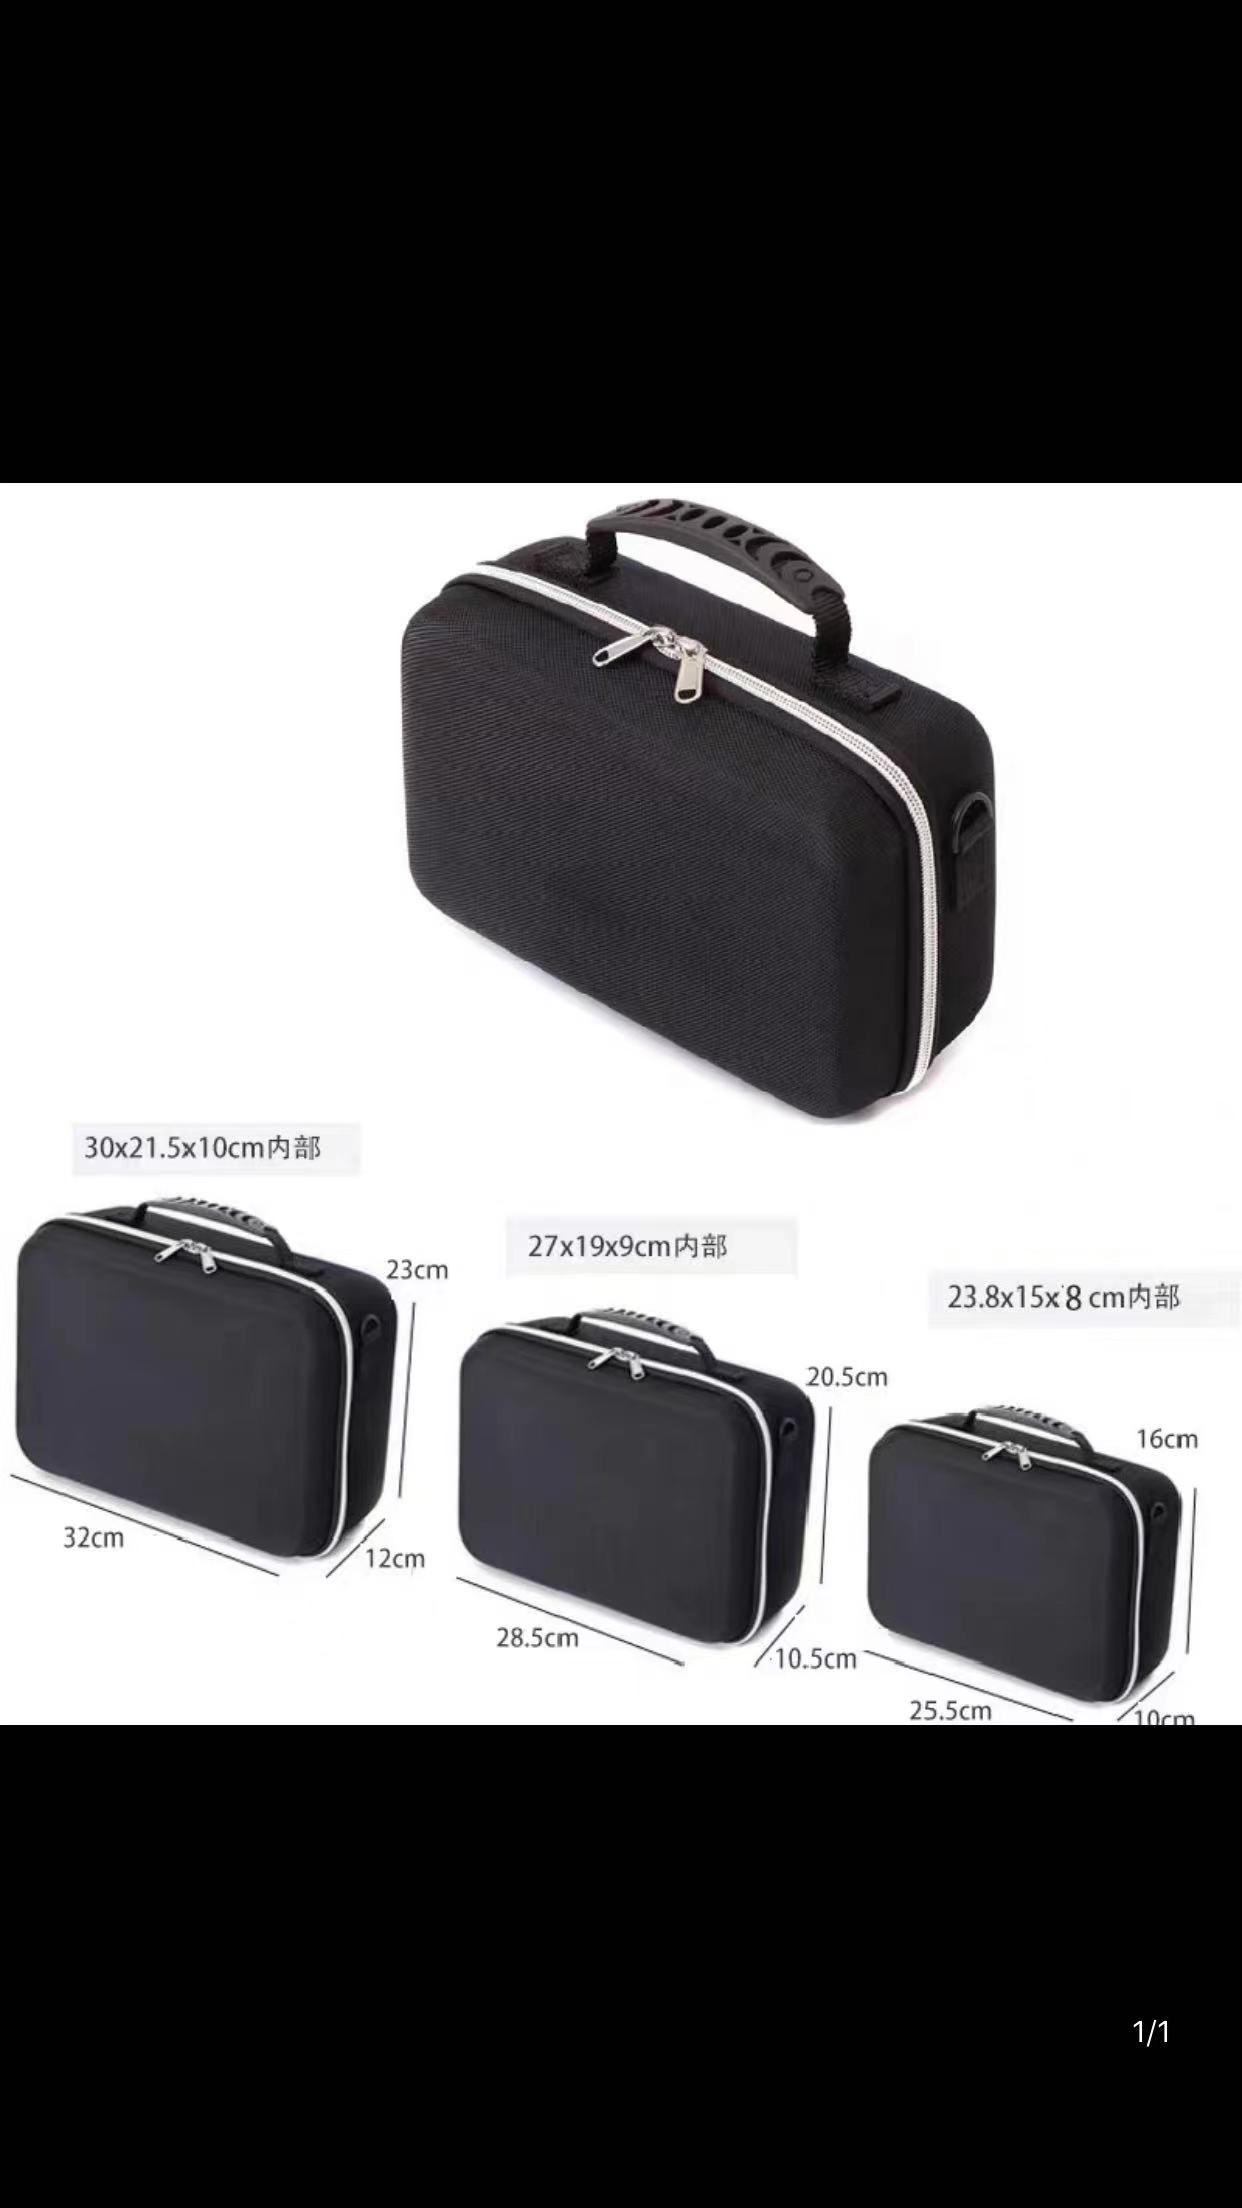 Newest Hard EVA Outdoor Travel Case Bag for NOCO Boost Plus GB40